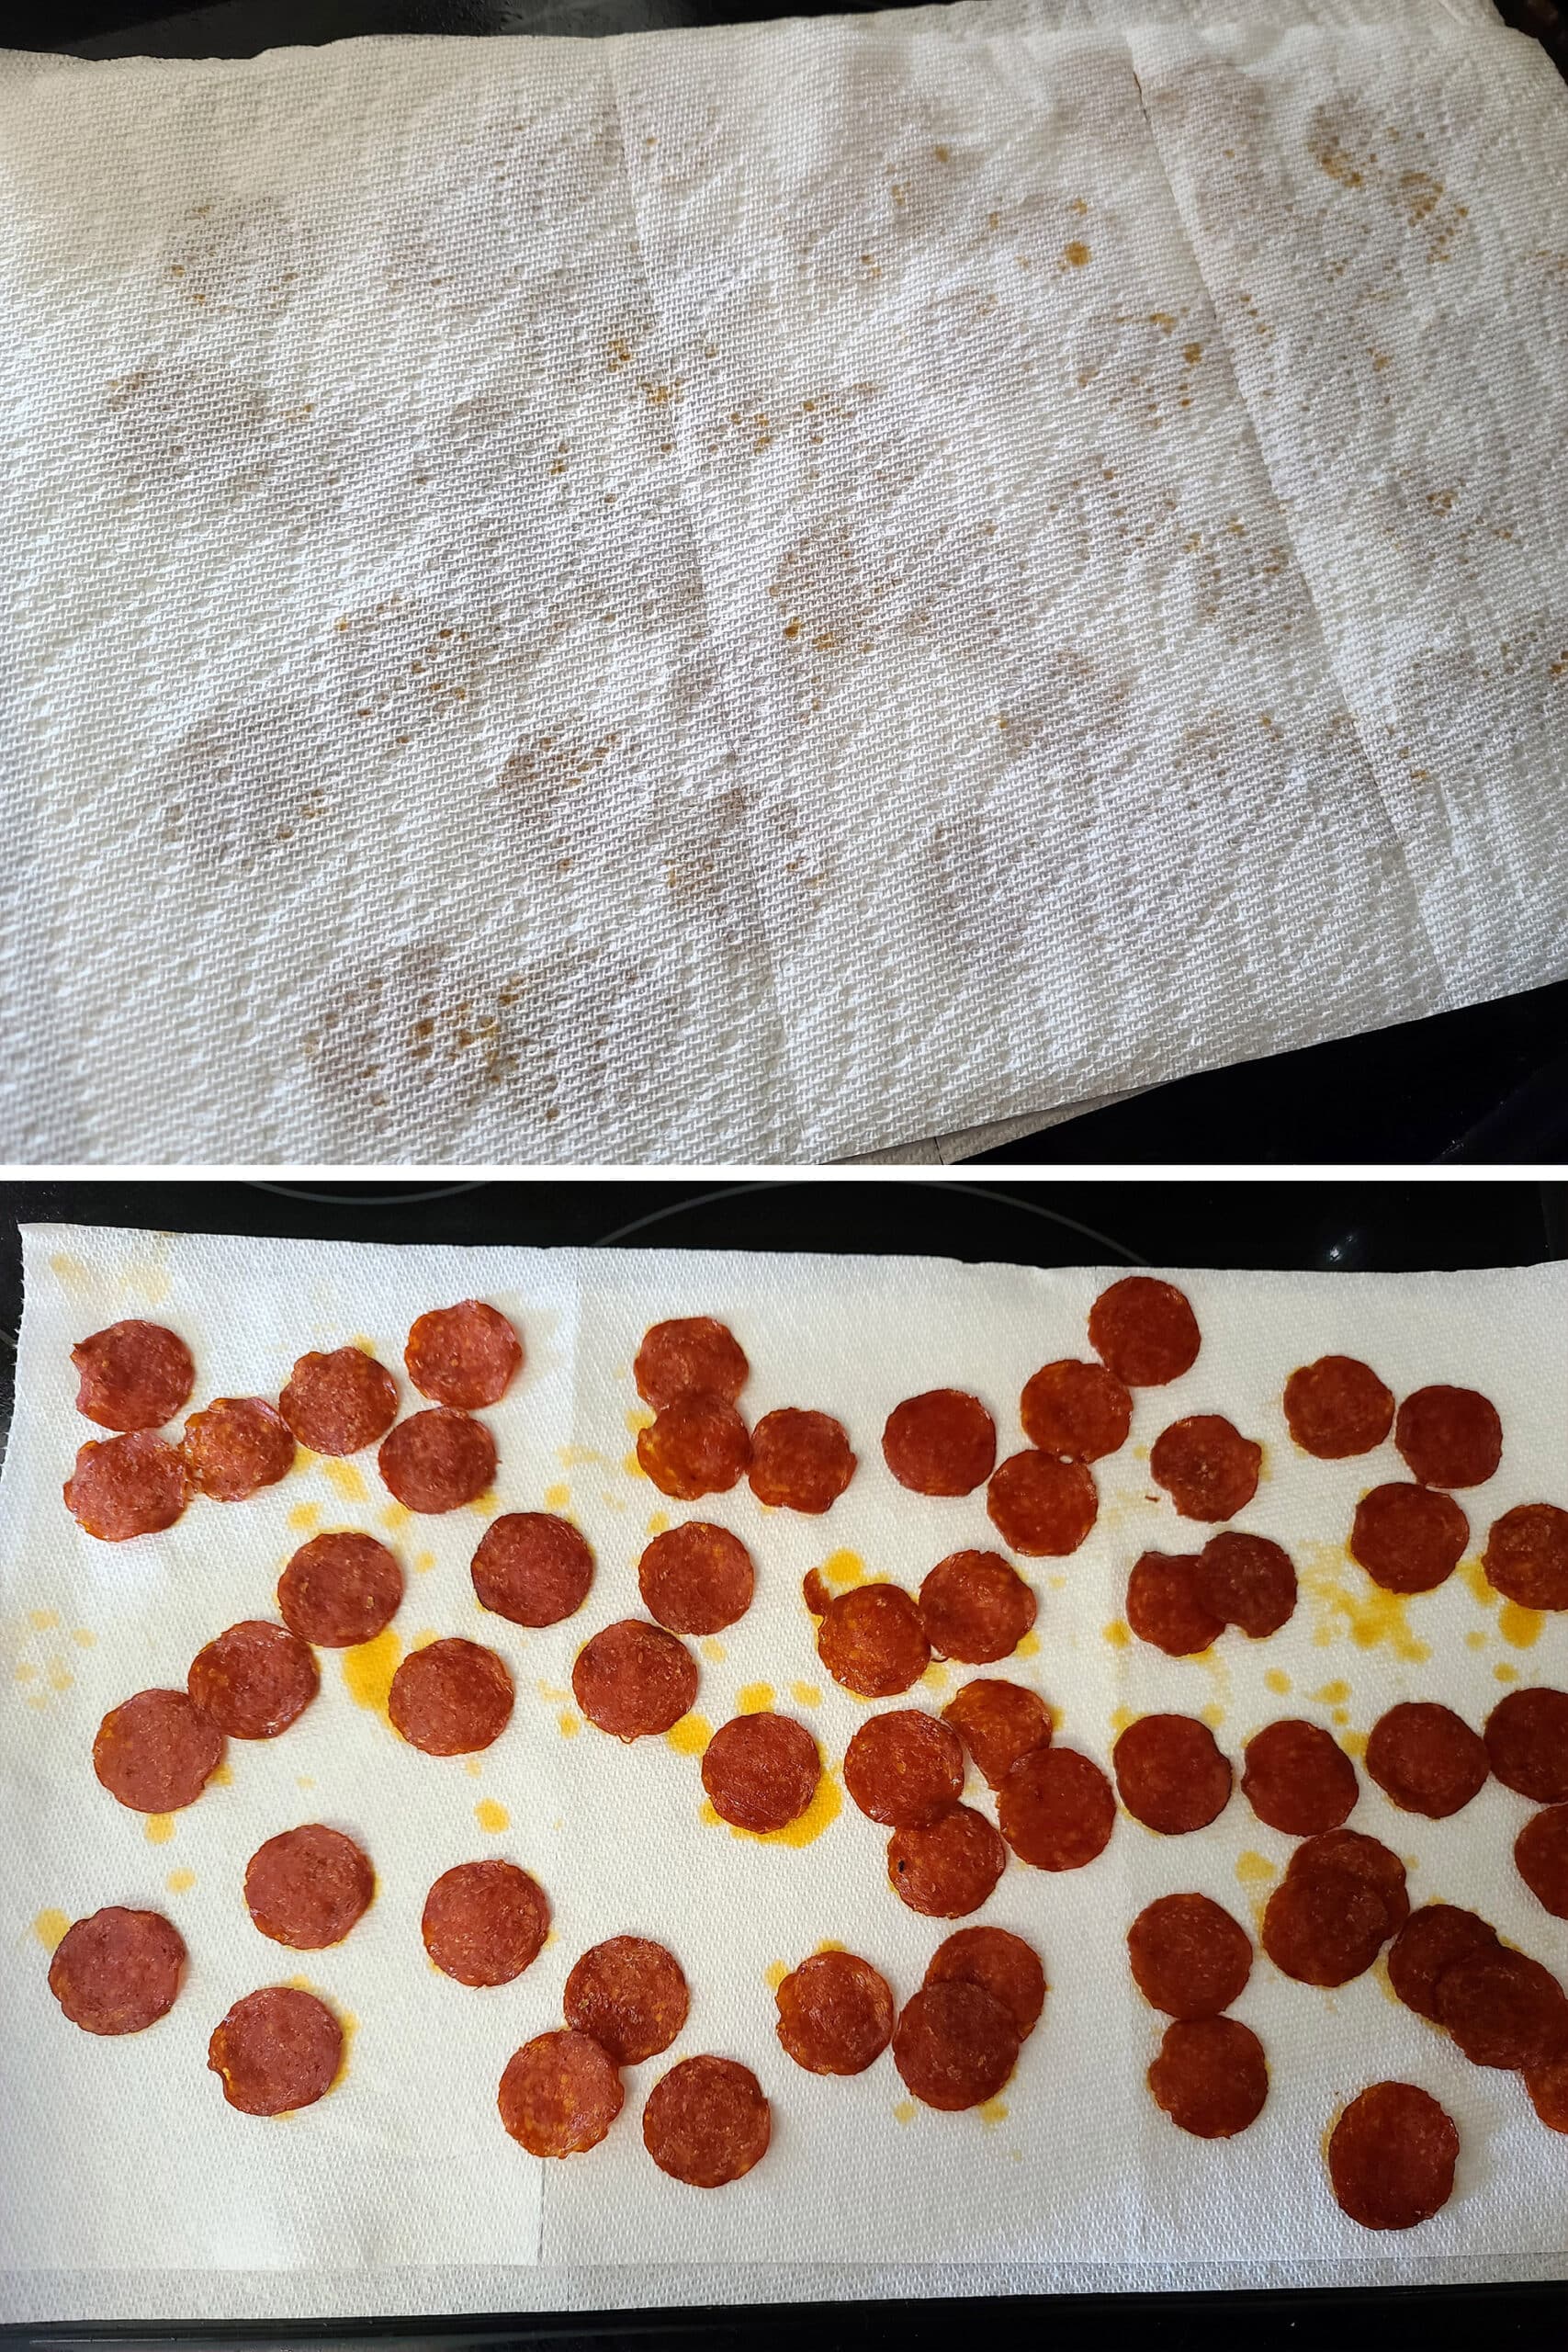 2 part image showing a layer of baked pepperoni chips sandwiched between layers of paper towel.